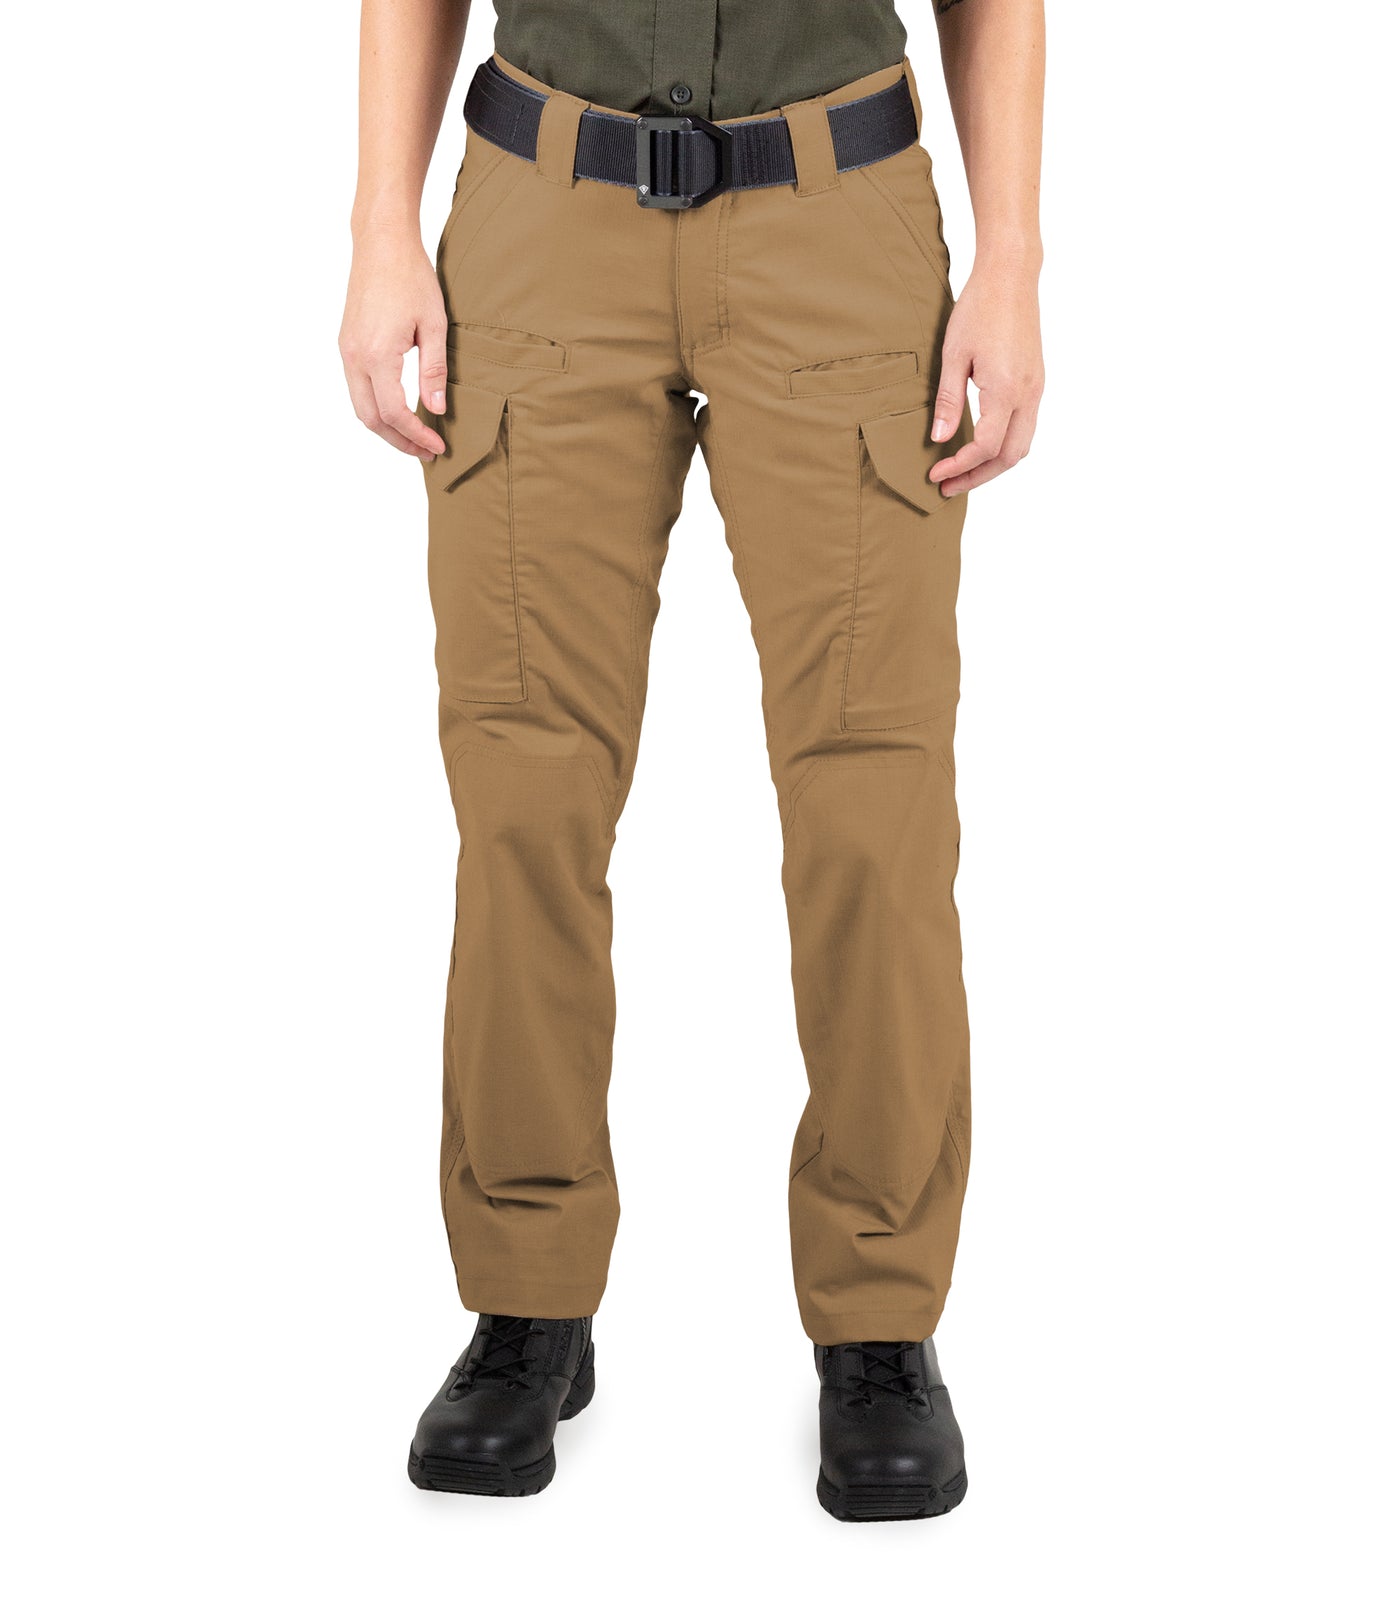  5.11 Tactical Pants,Coyote Brown,0 : Clothing, Shoes